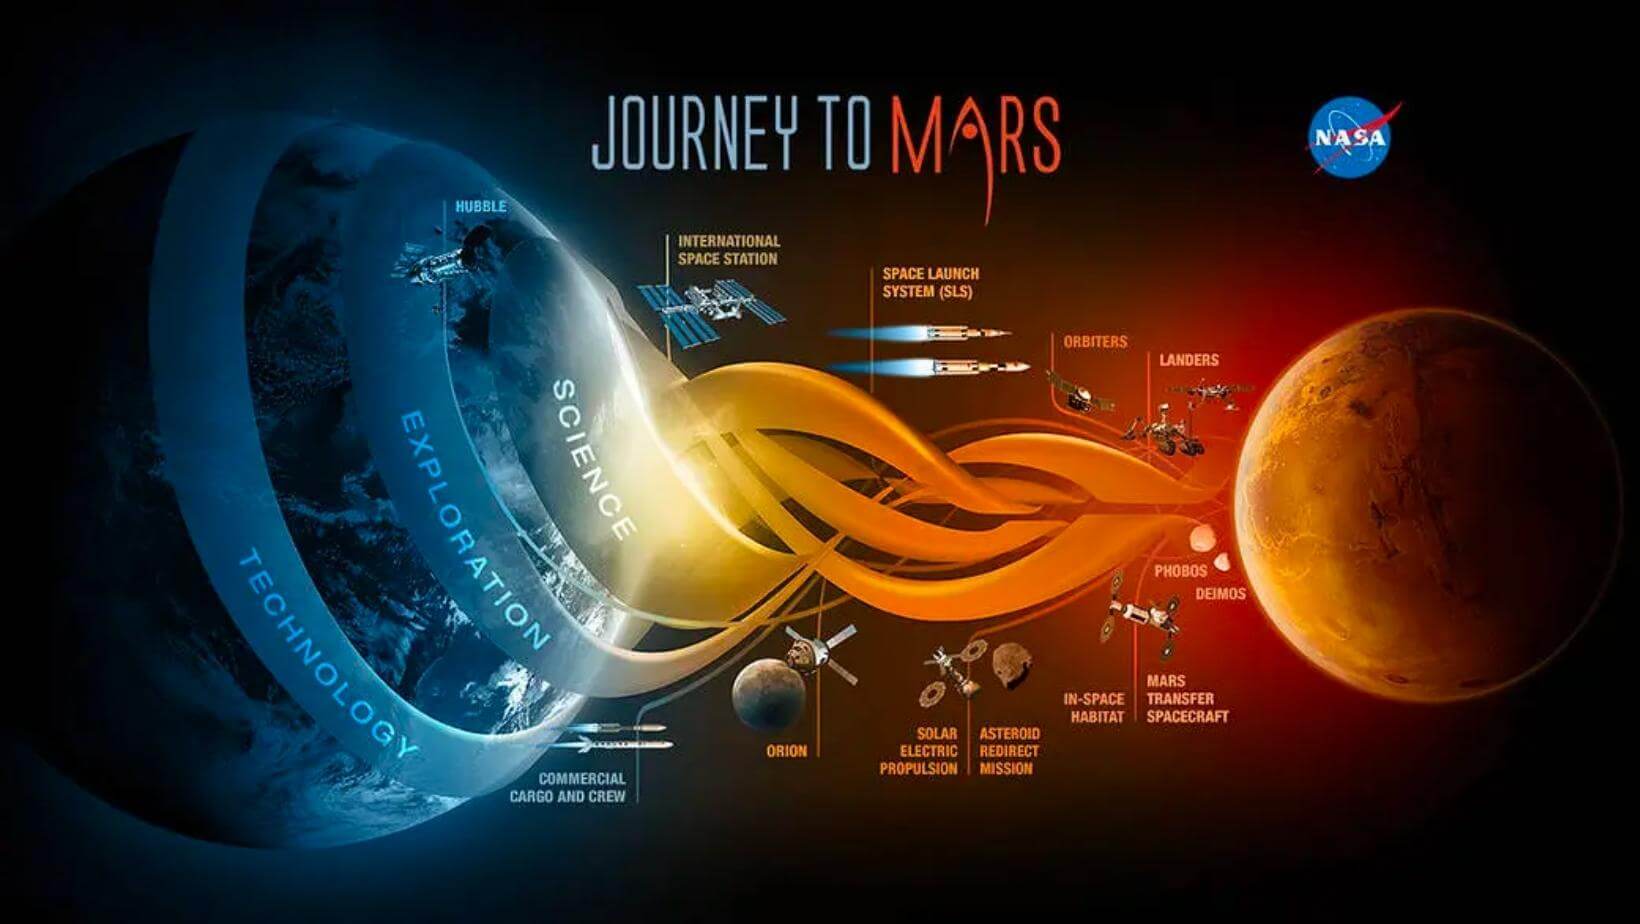 NASA's all missions to mars